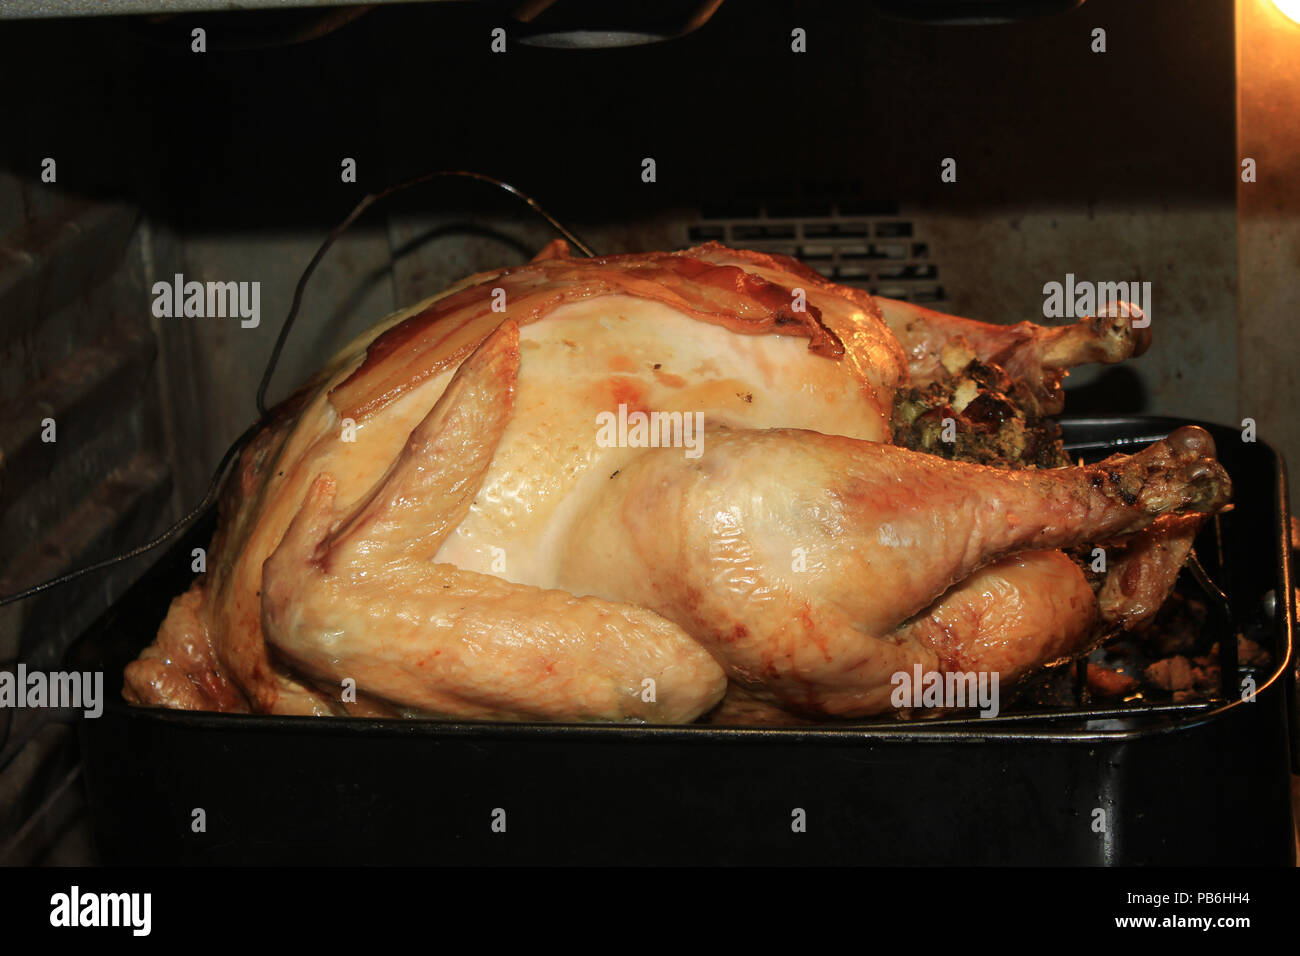 https://c8.alamy.com/comp/PB6HH4/cooked-turkey-with-bacon-in-a-roasting-pan-in-the-oven-PB6HH4.jpg